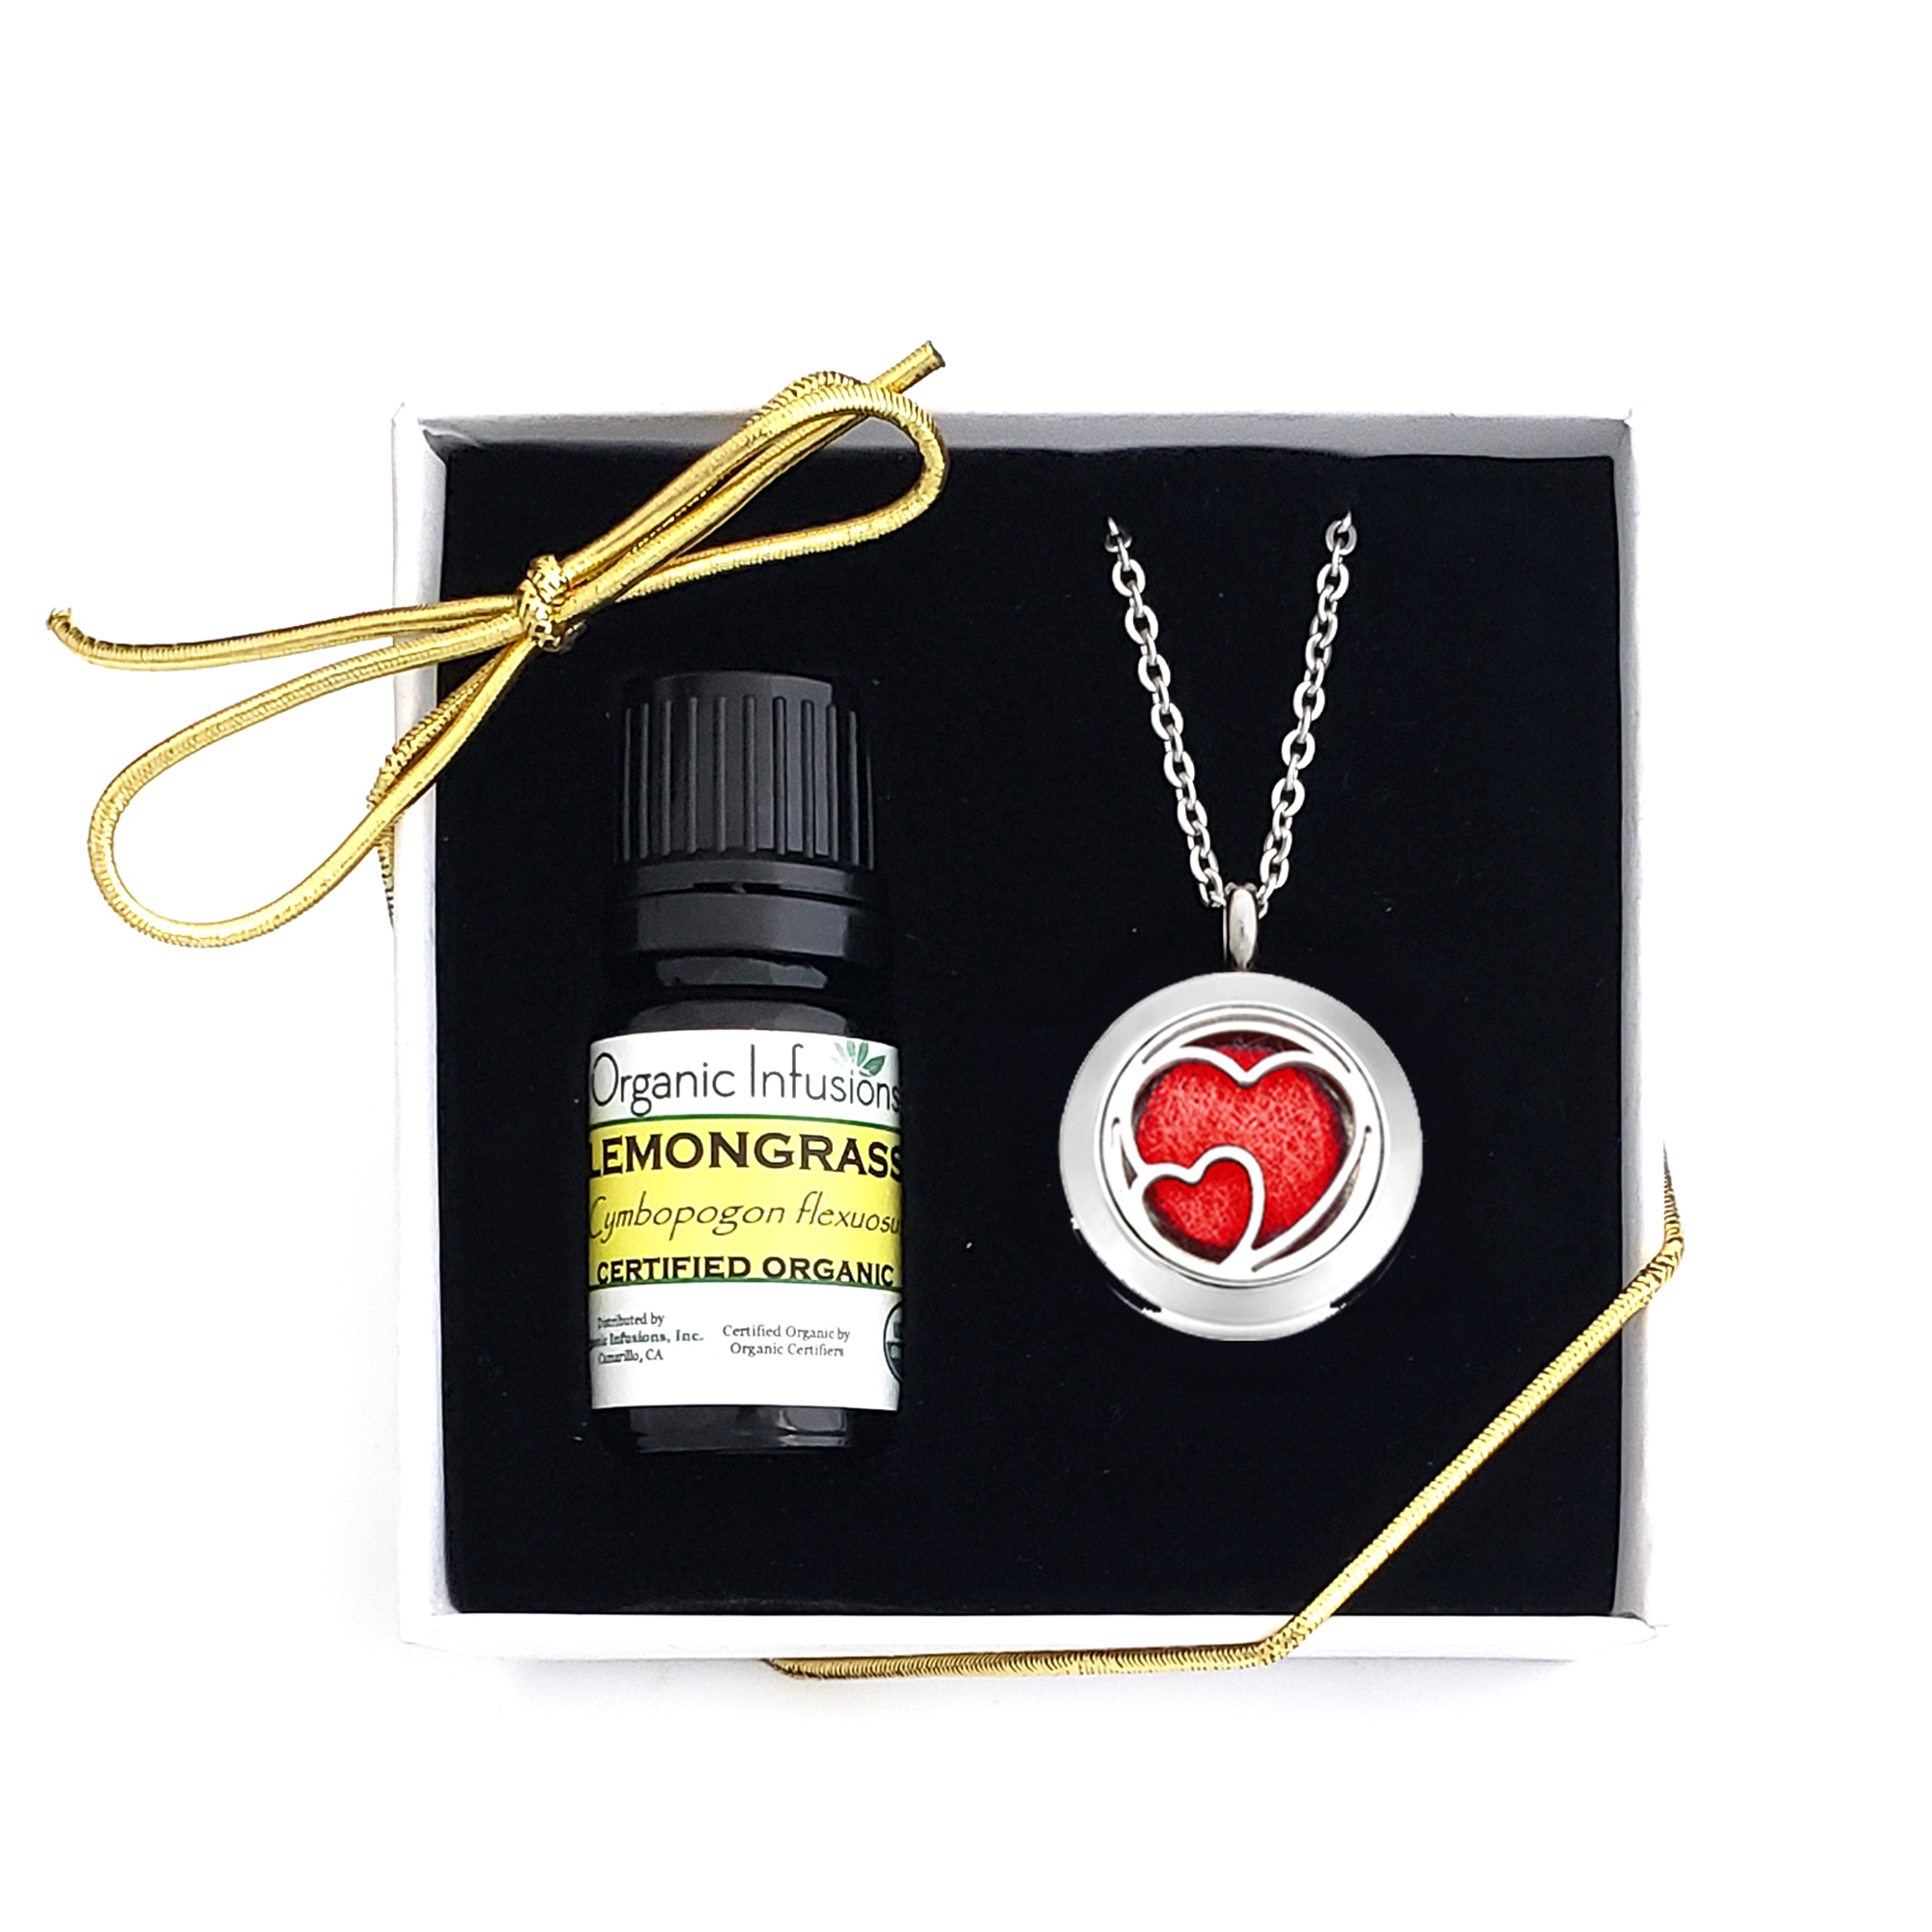 Anavia AromatMomapy Starter Kit, Gift for Mom, Heart Necklace, Diffuser Jewelry, Gift for Wife, Wife Birthday Gift, Gift for Girlfriend, Anniversary Gift, Friend Gift, Gifts for Mom Ship Next Day! - image 1 of 6